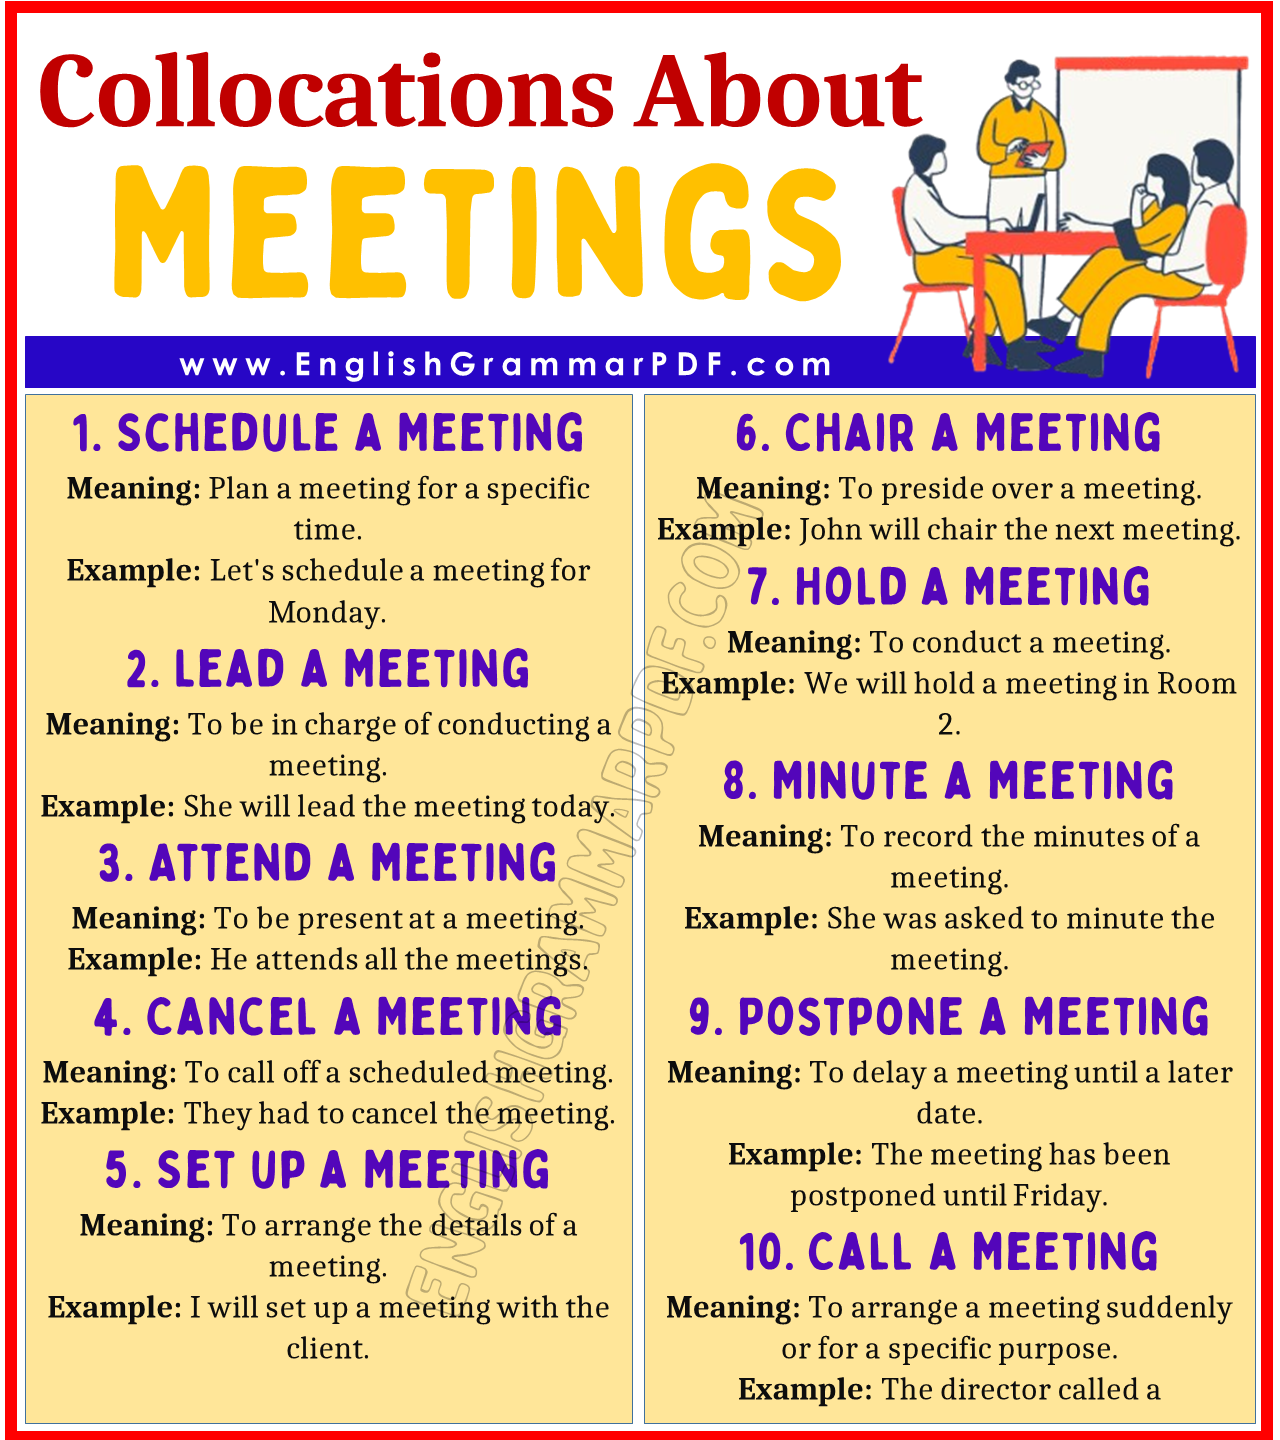 Collocations About Meetings